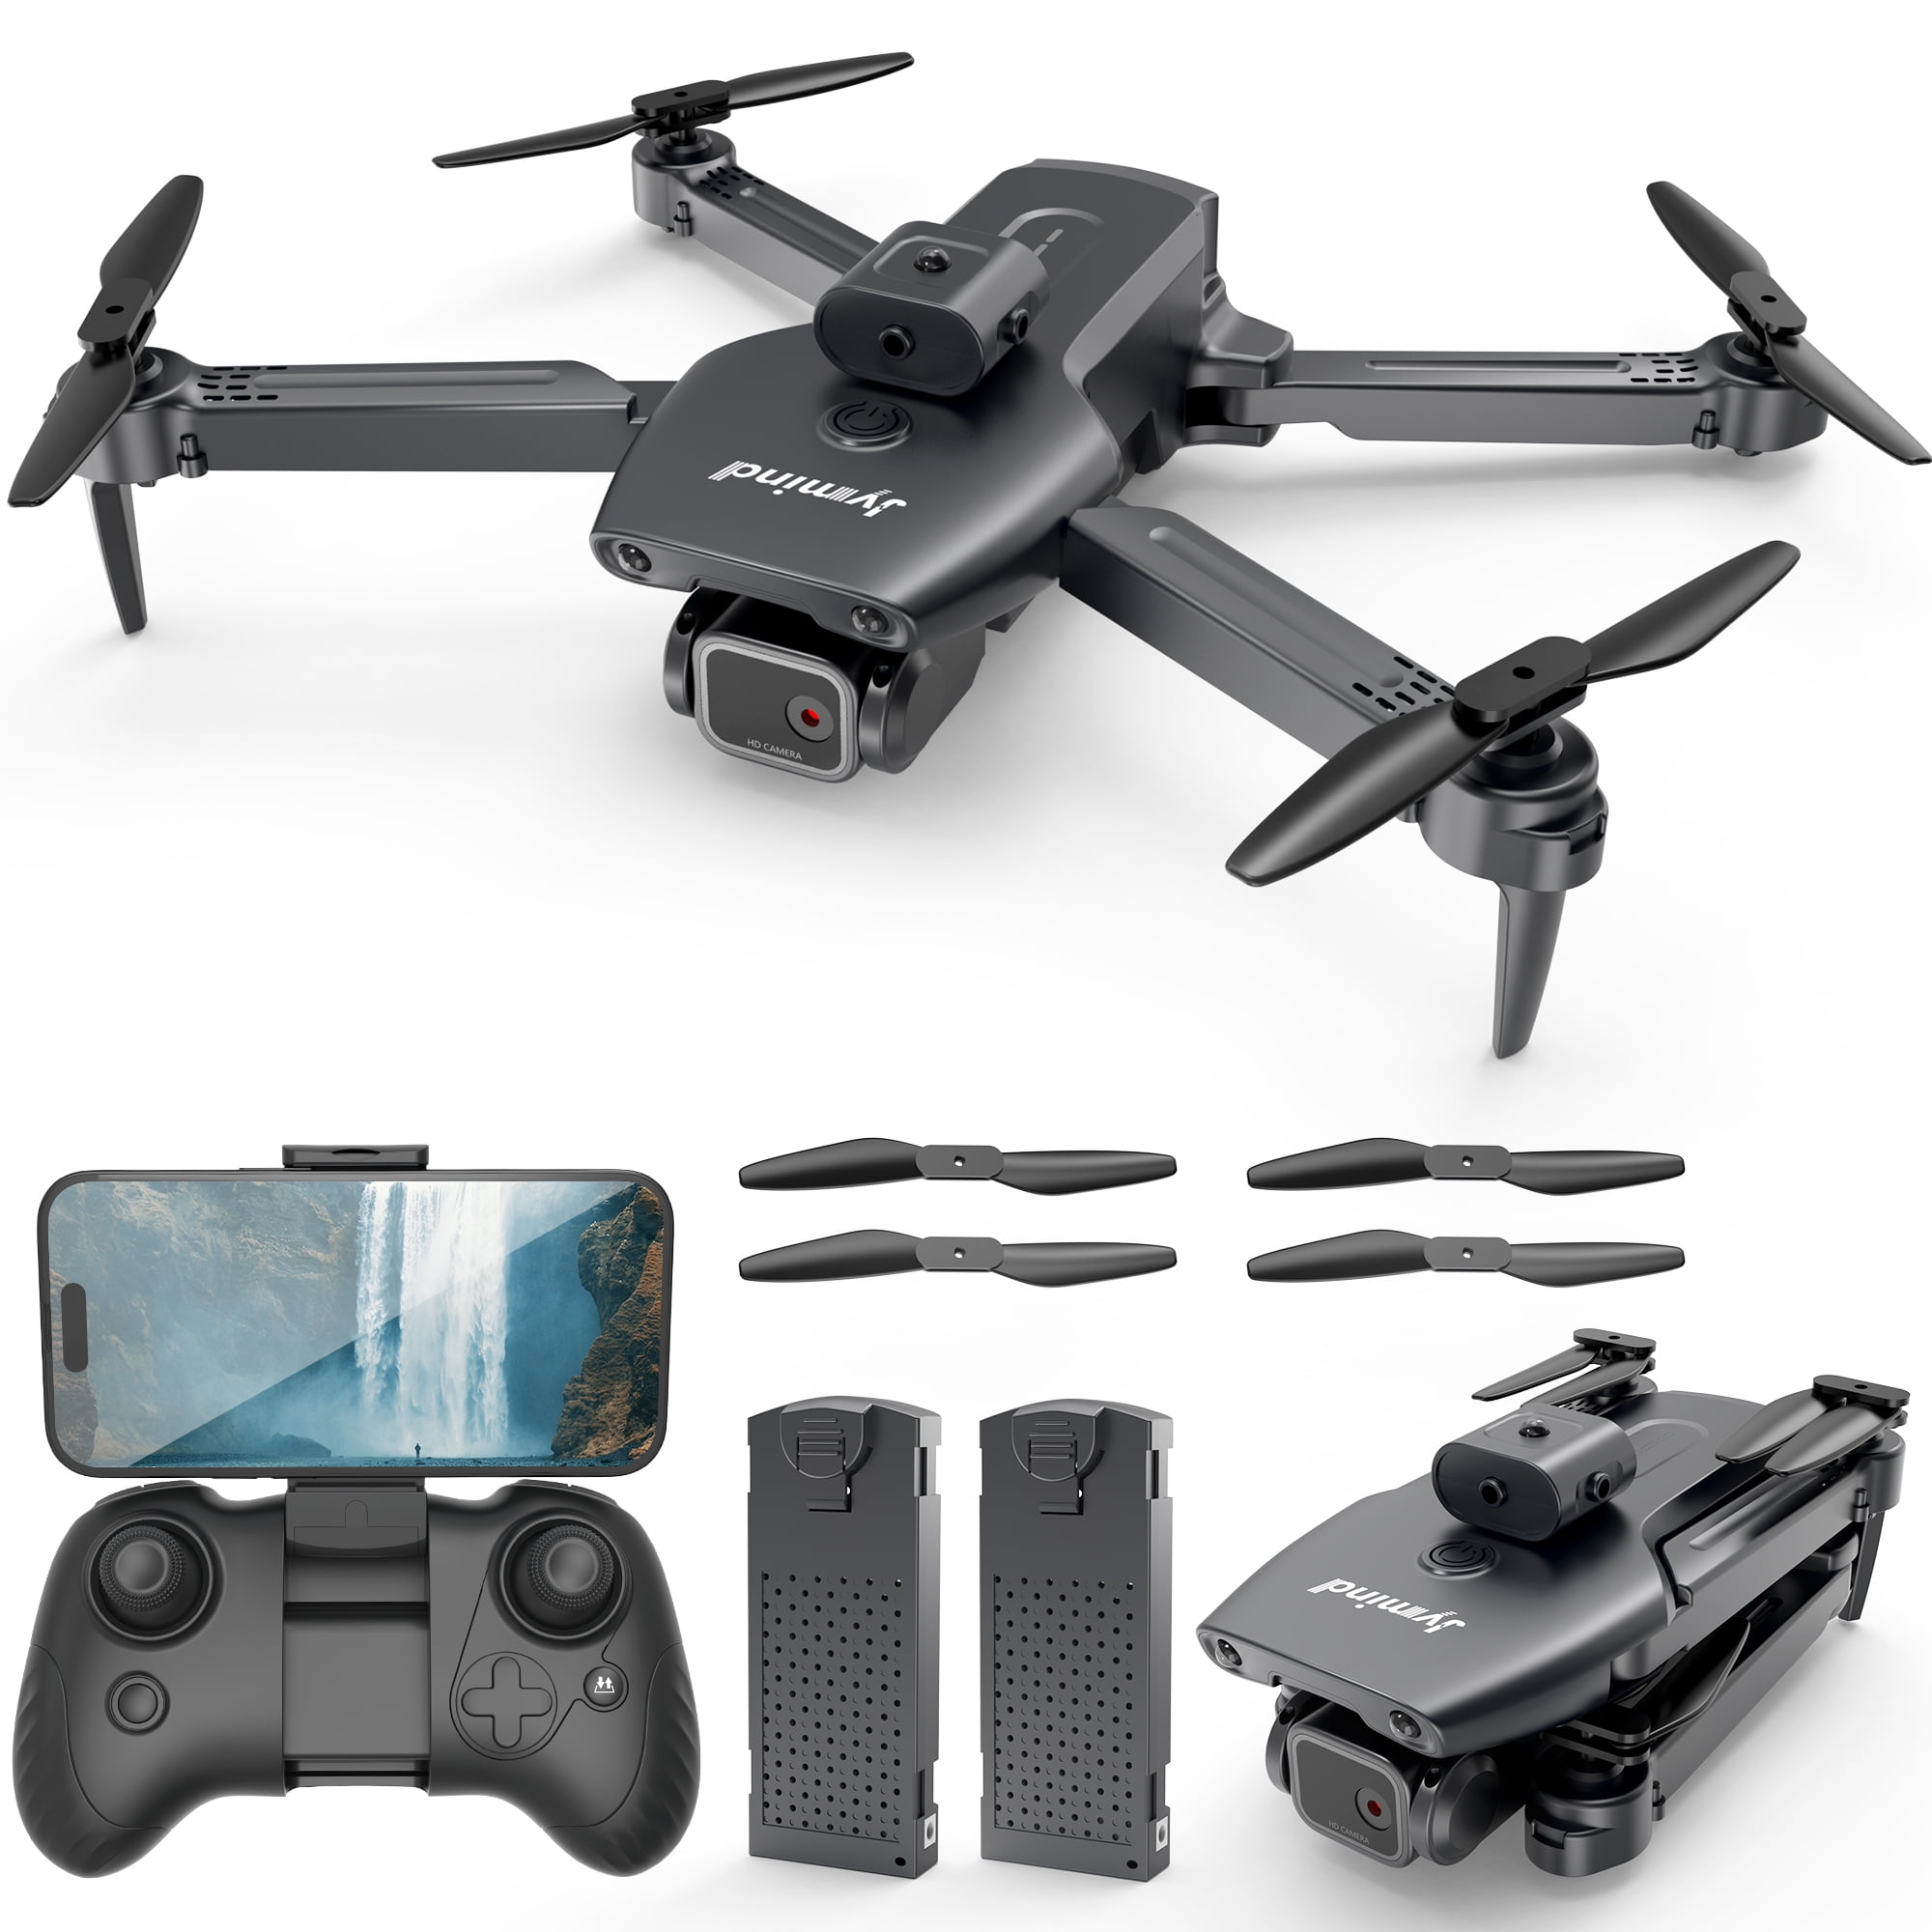 TizzyToy Drone with Camera 4K, Drones for adults, WiFi FPV RC Quadcopter  with Gesture Control, 3D